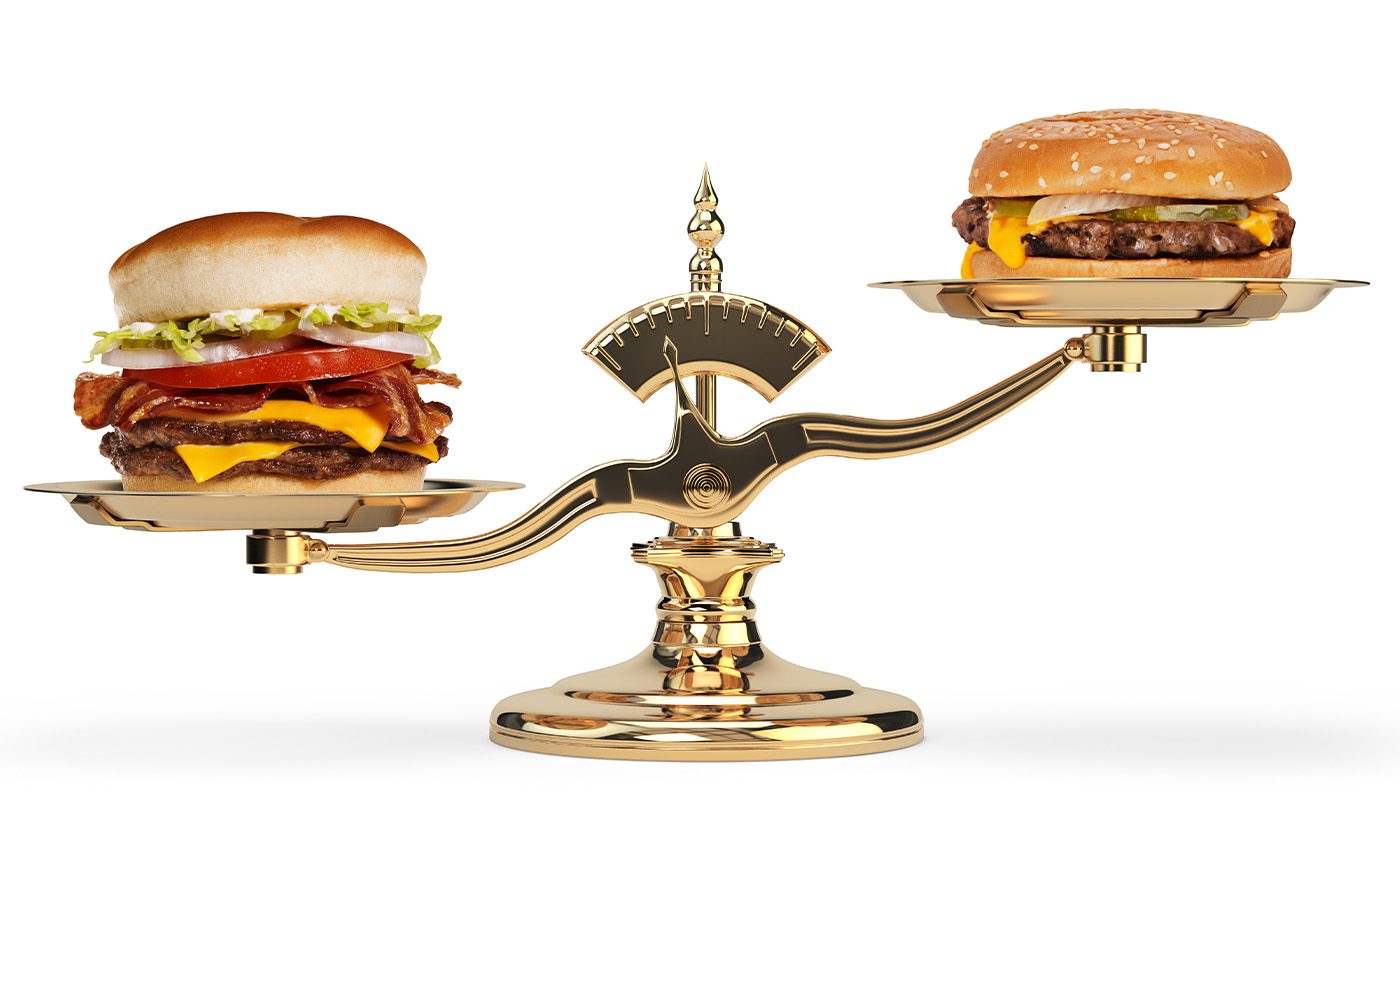 Background is white. Gold scale is in the center of the photo. Left side of scale is lower with an A&W Original Bacon Cheeseburger on the stand. A smaller Cheeseburger is on the right stand and higher in the air.